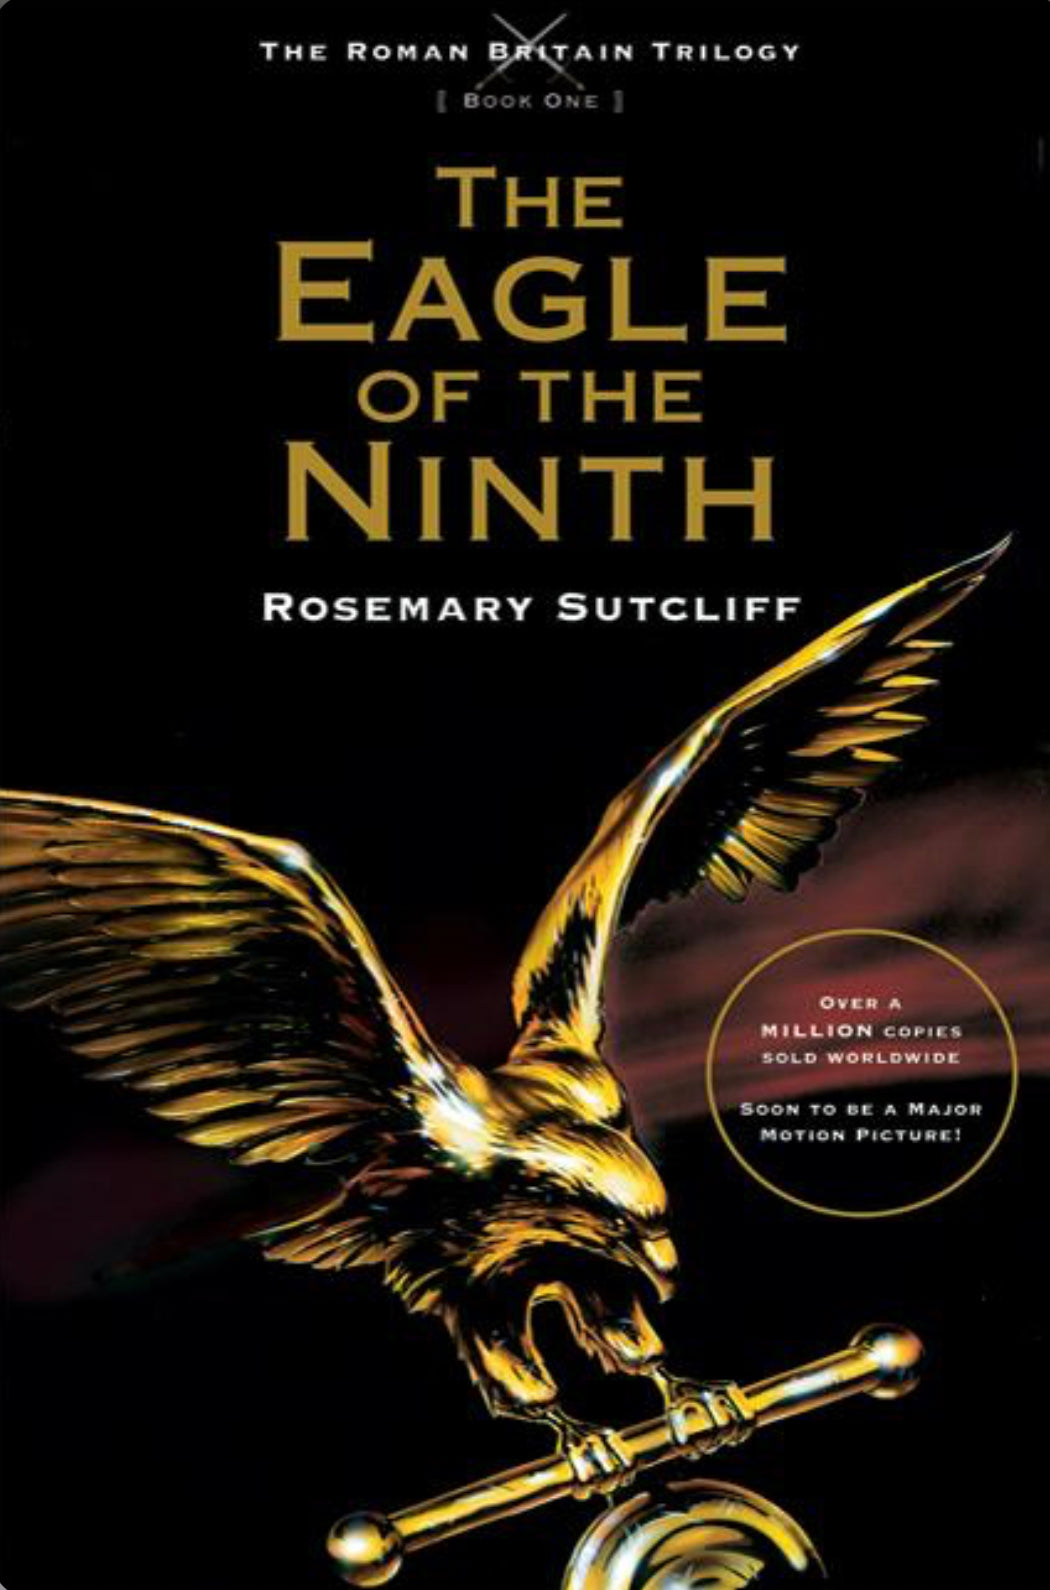 The Eagle of the Ninth, retold by Rosemary Sutcliff - Alder & Alouette